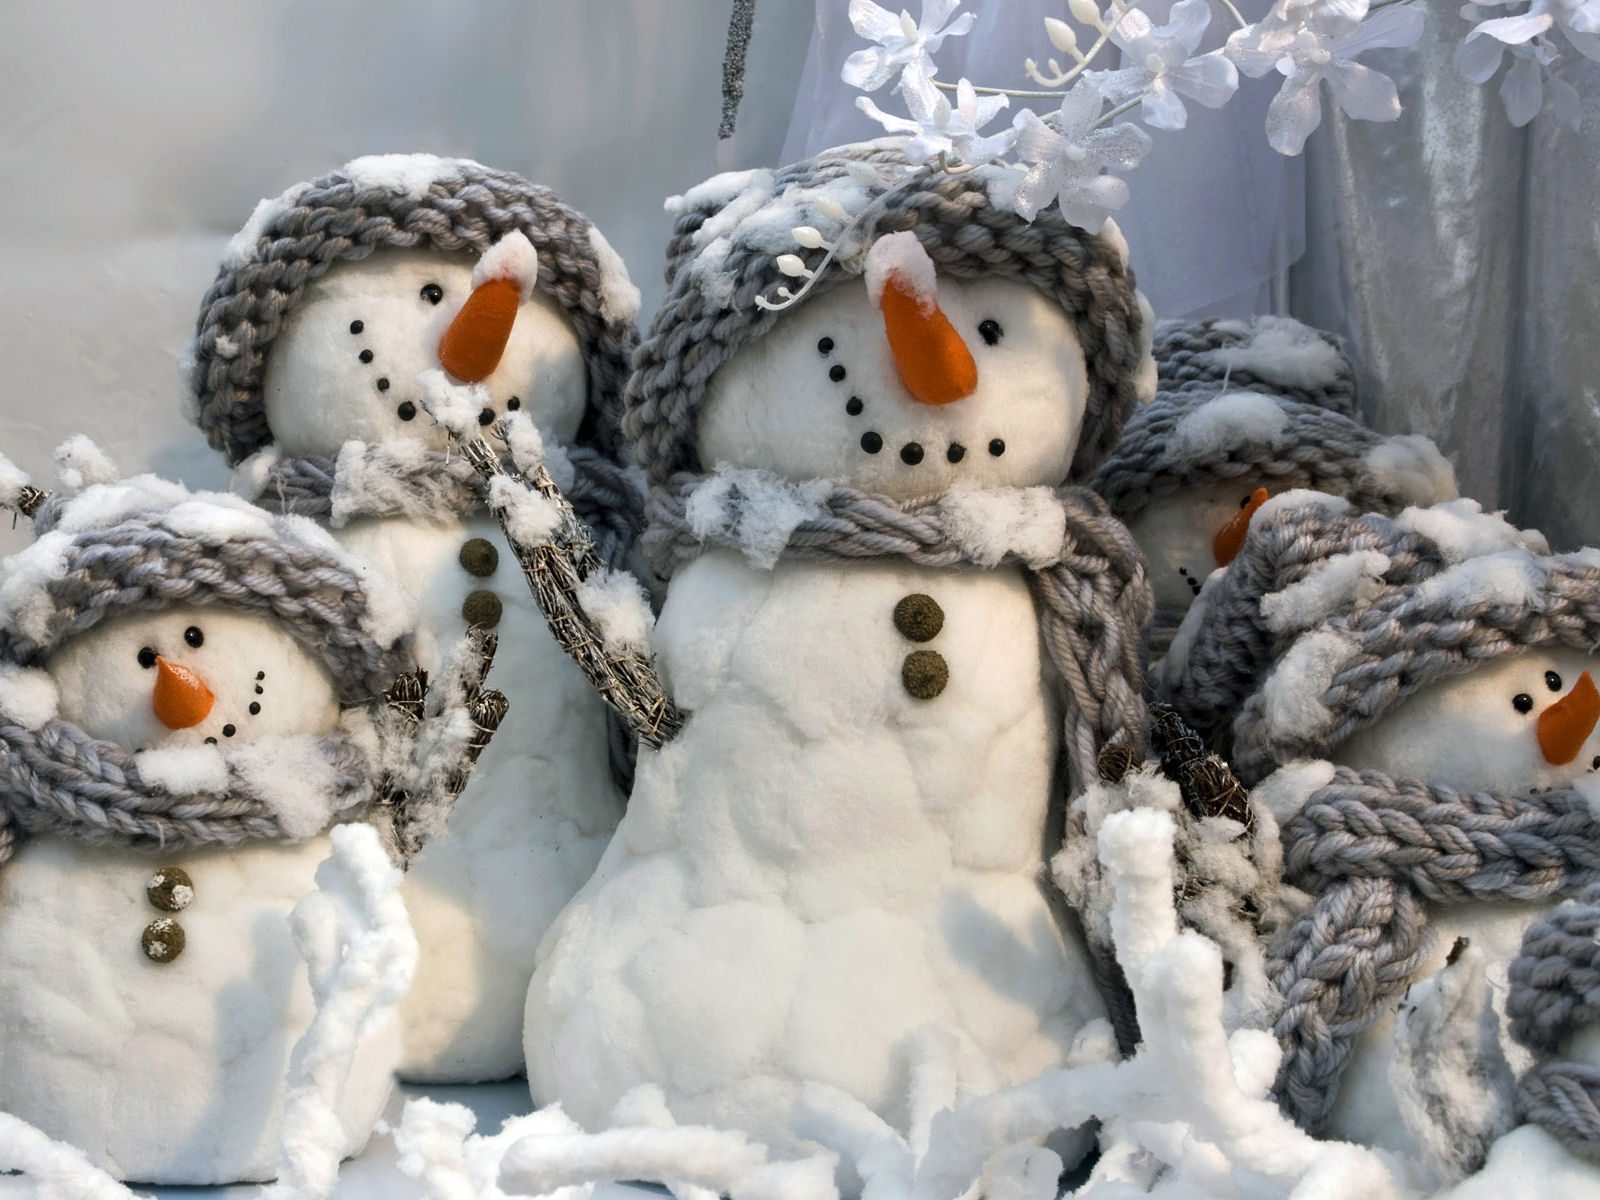 HD Free Snowman Wallpapers Download Free - 813321